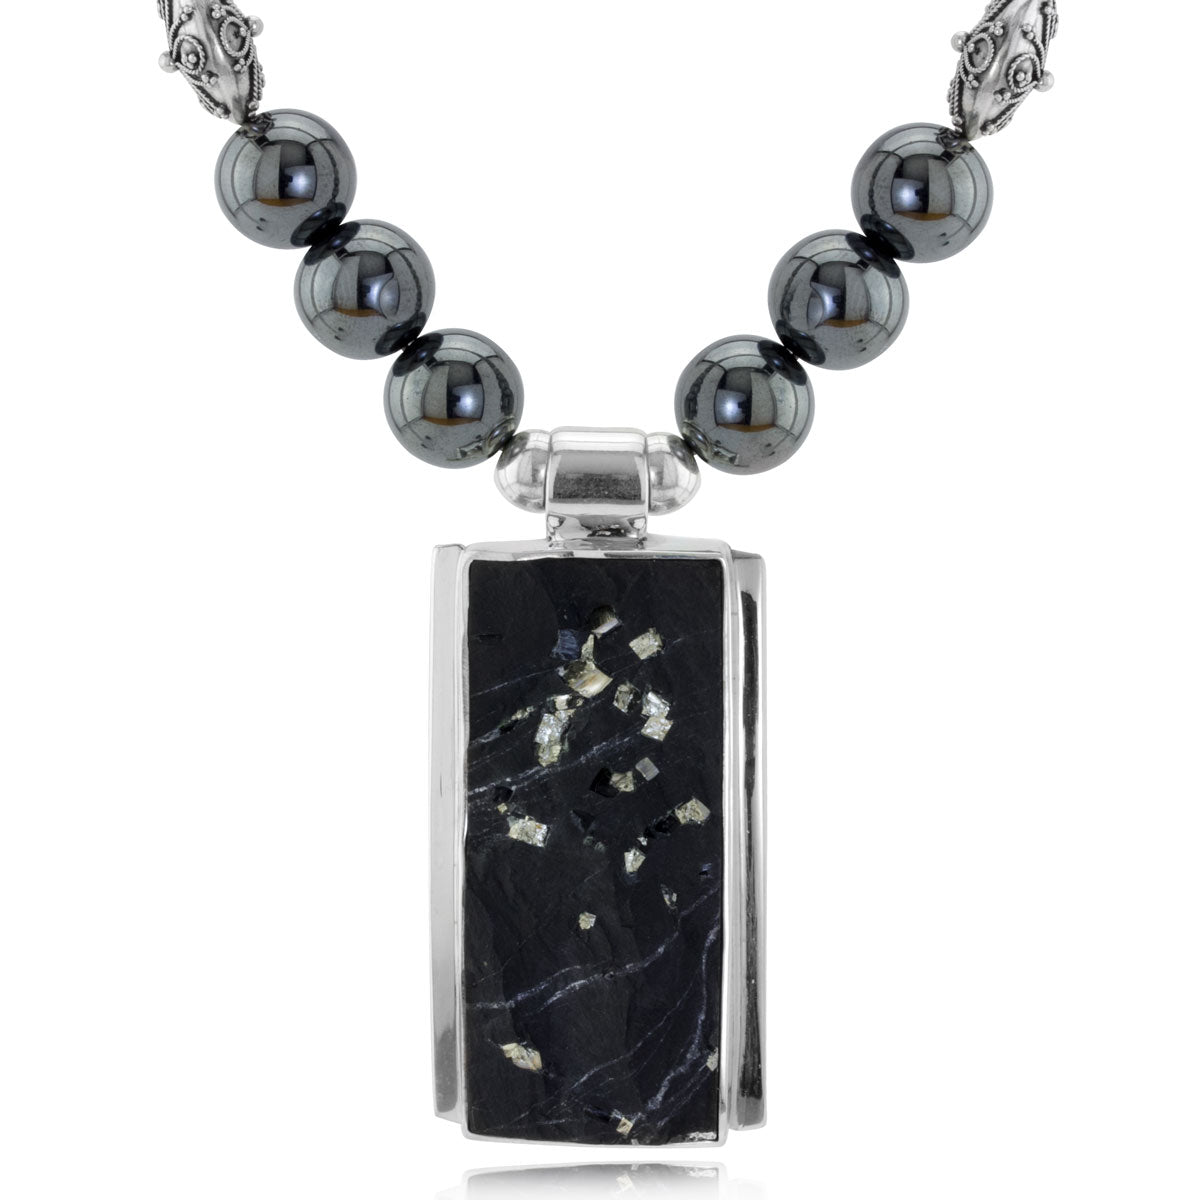 The Goddess Collection Hematite Necklace